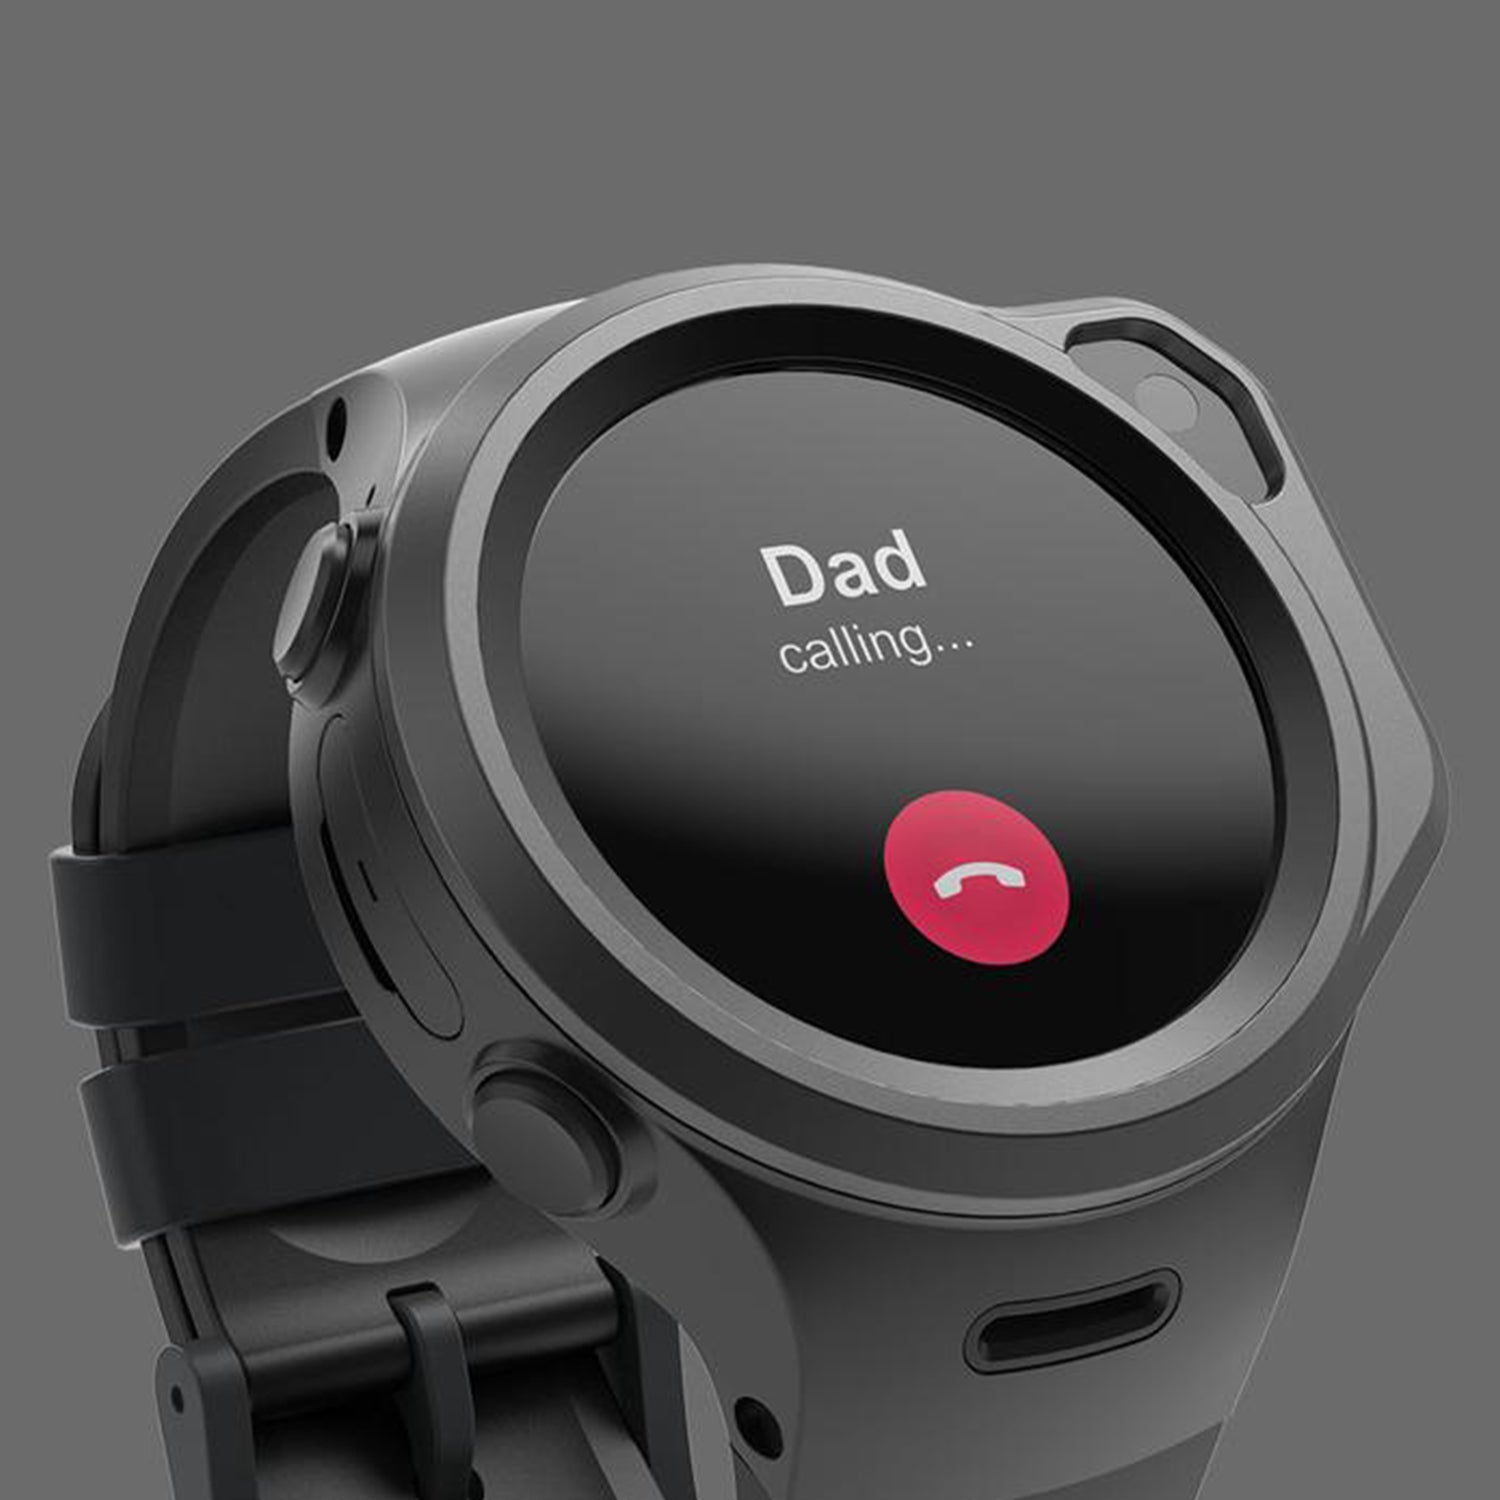 Get smart watch with video call features for kid